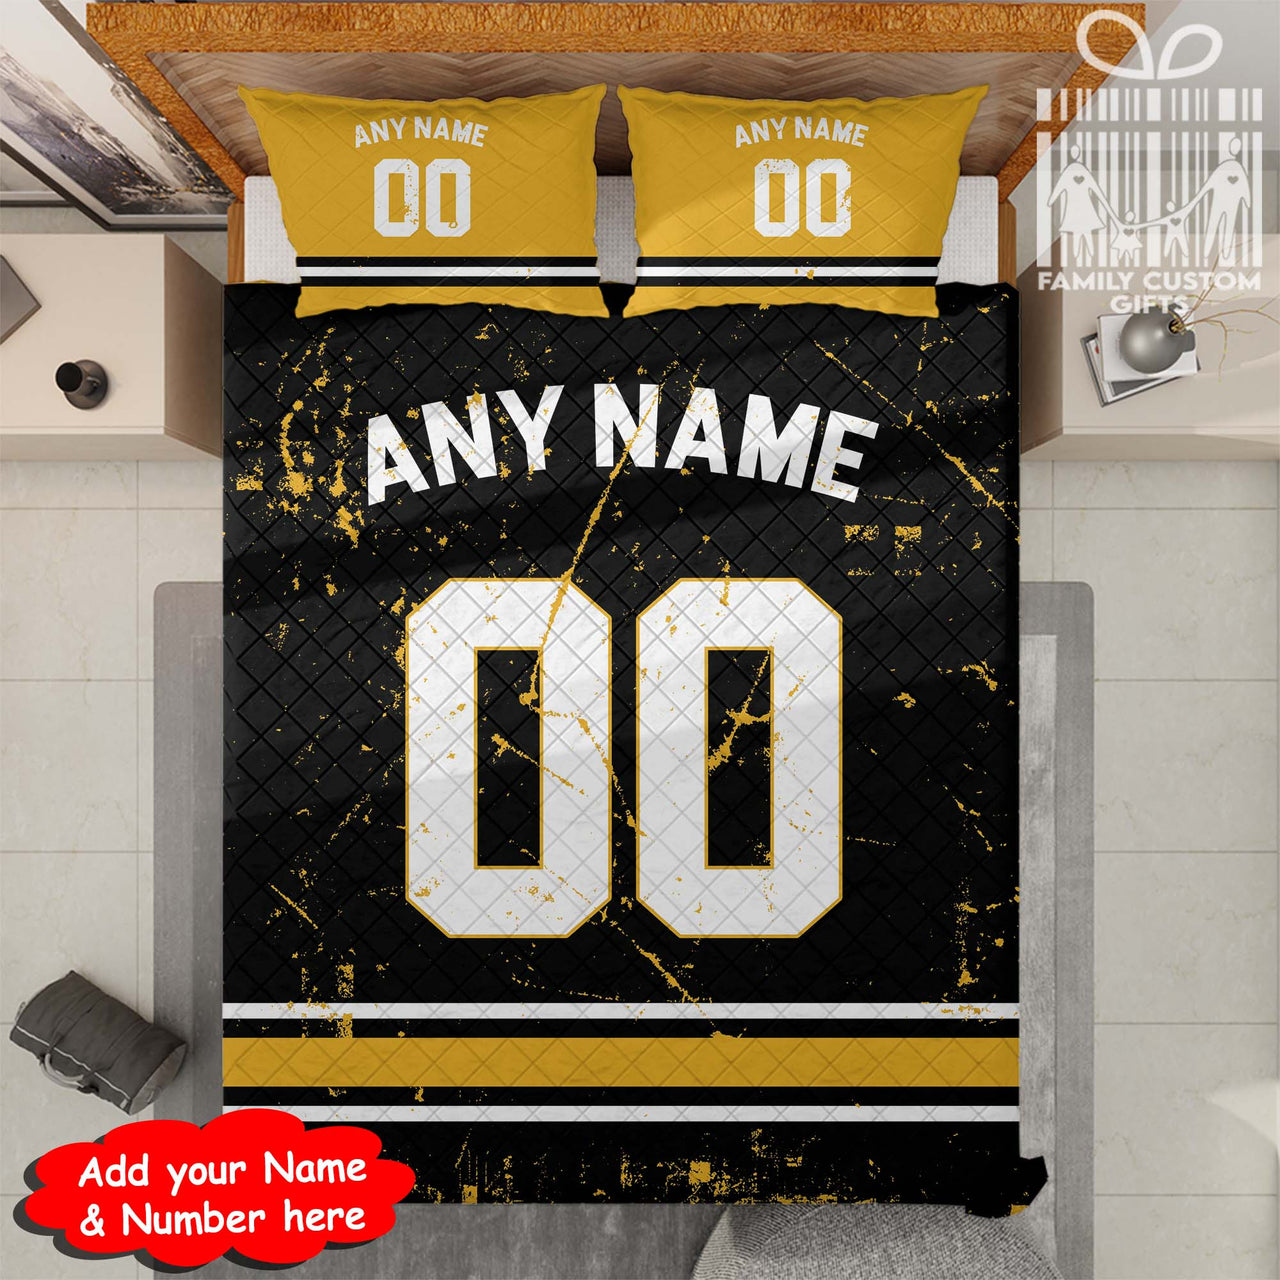 Custom Quilt Sets Pittsburgh Jersey Personalized Football Premium Quilt Bedding for Men Women